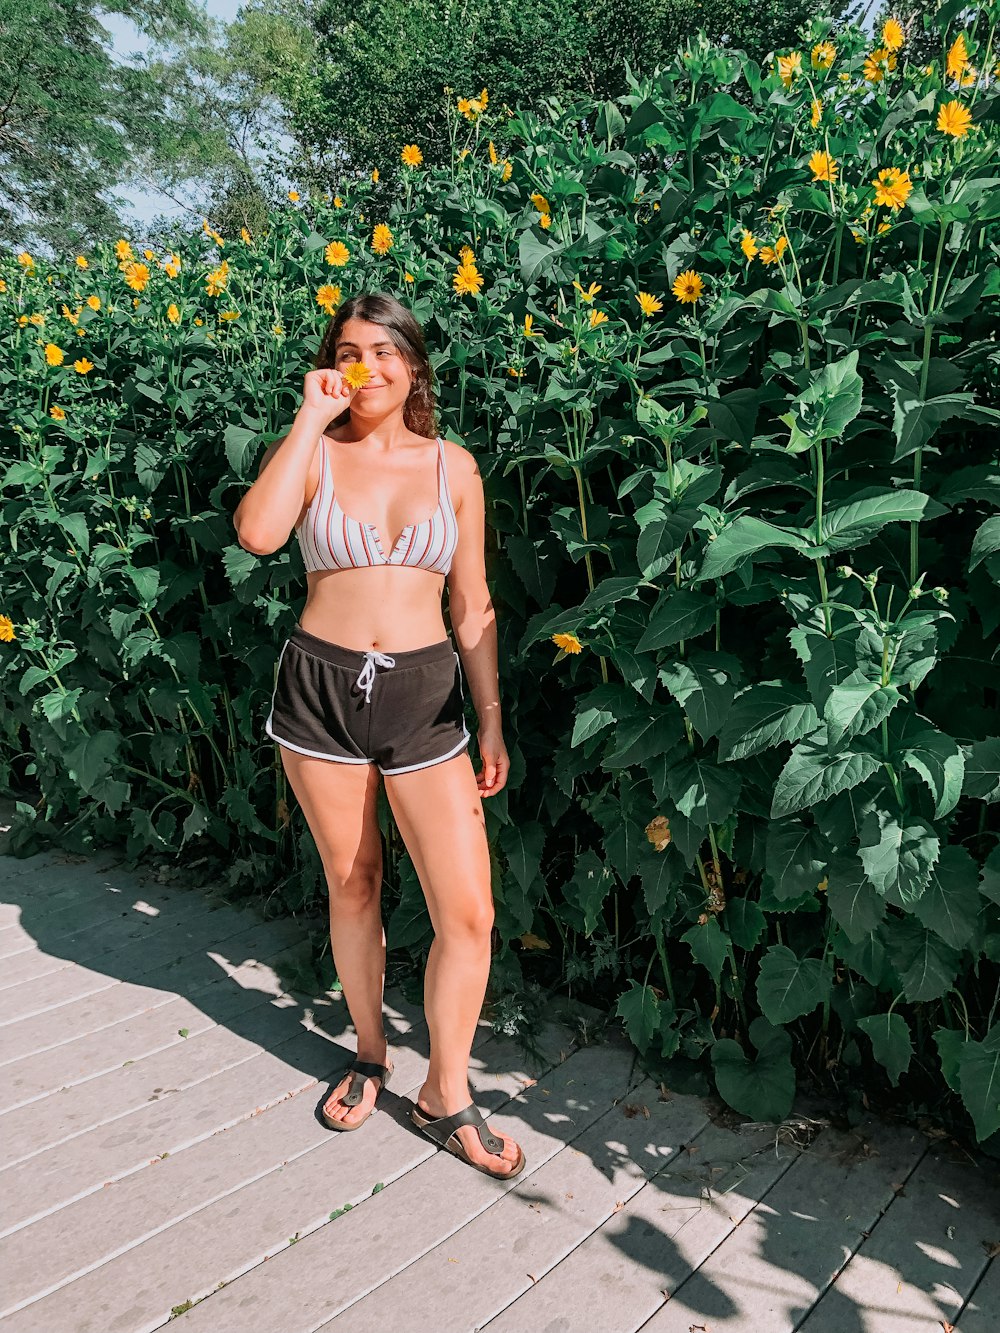 a woman in a bikini standing next to a bush of sunflowers